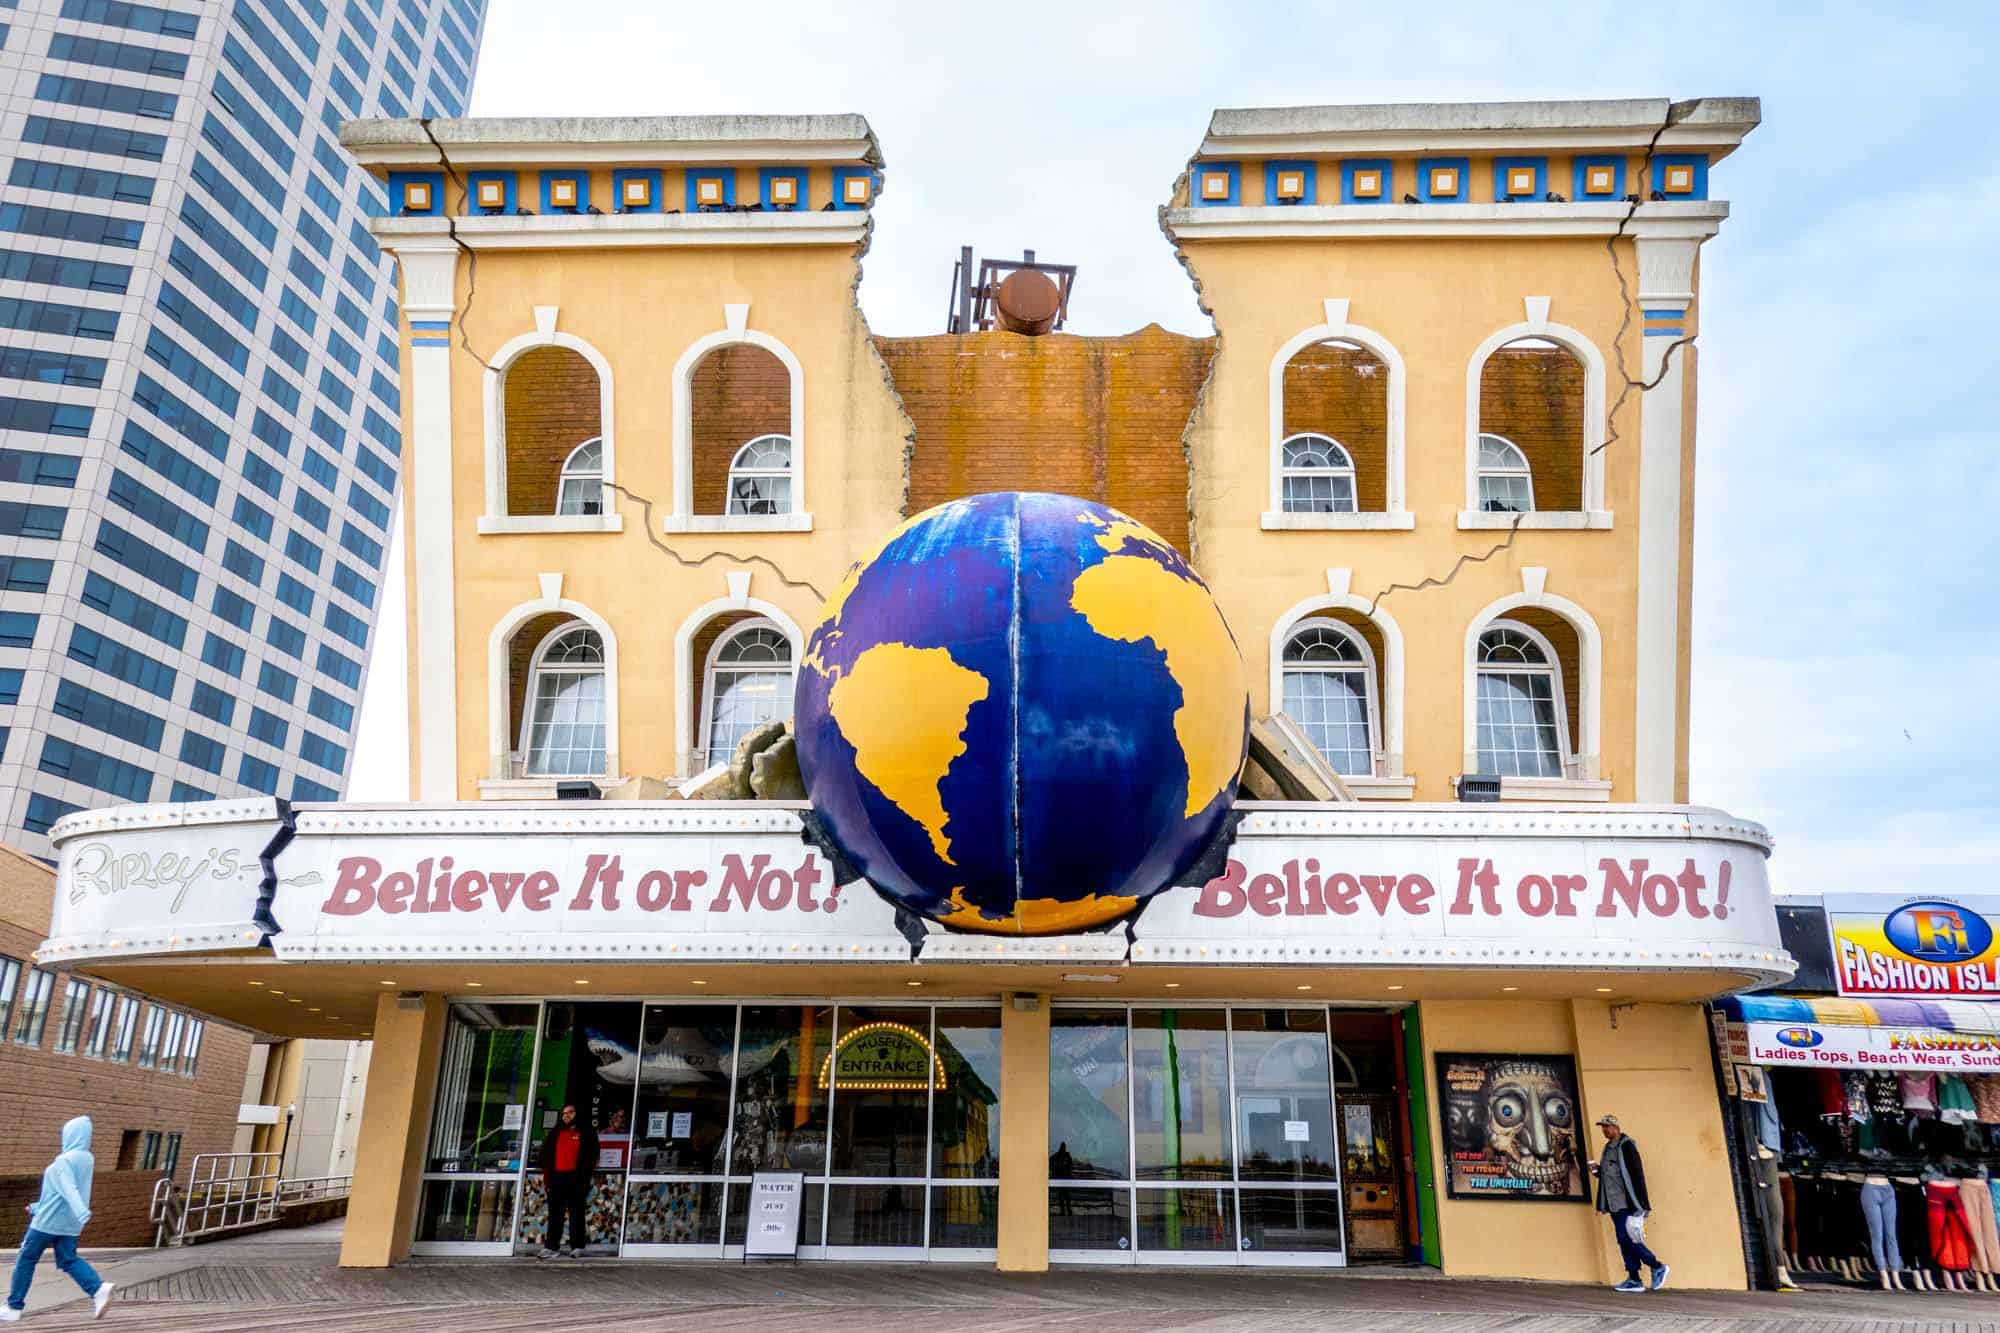 Yellow building with a globe in the middle and a sign for "Ripley's Believe It or Not!"